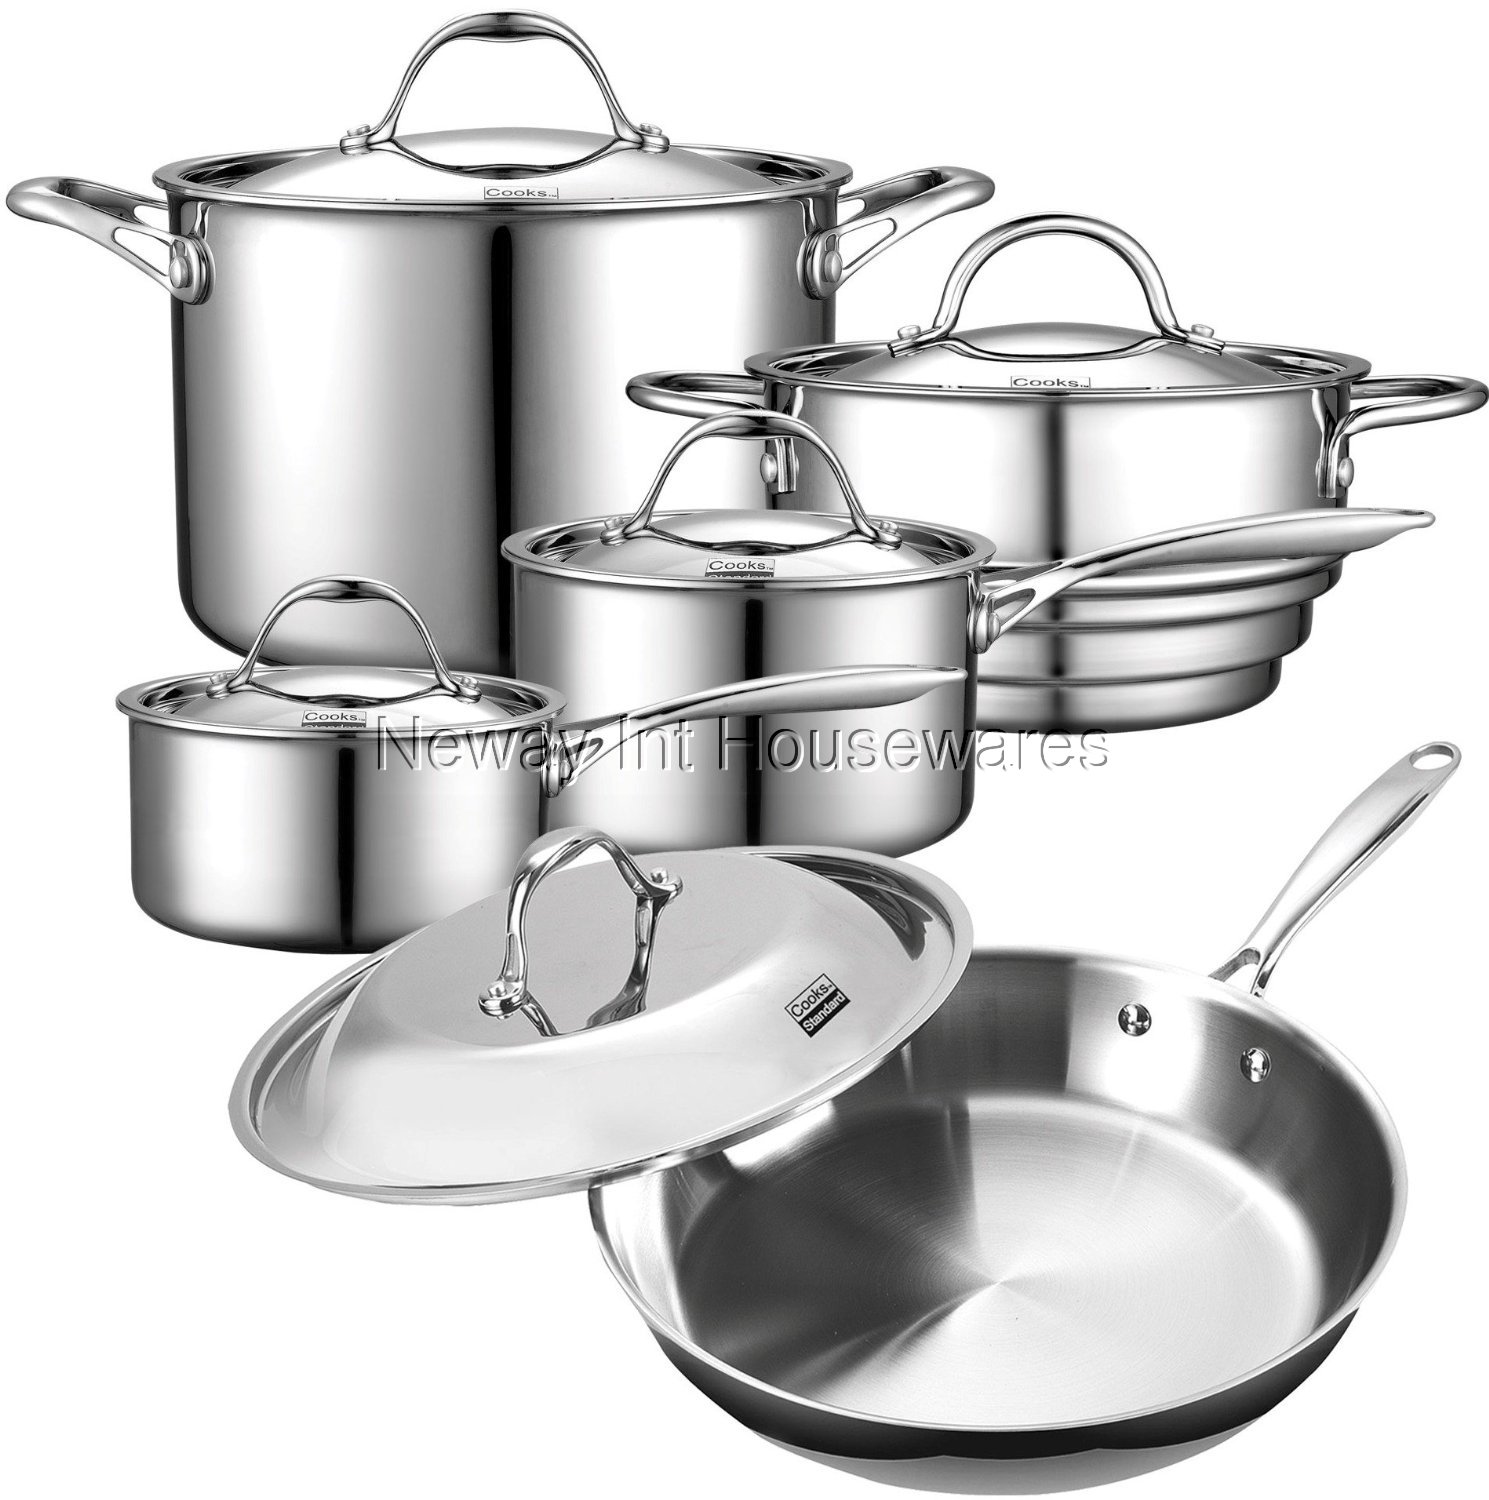 Cook N Home Store : Cooks Standard 10-Piece Multi-Ply Clad Stainless Cook N Home 10 Piece Stainless Steel Cookware Set